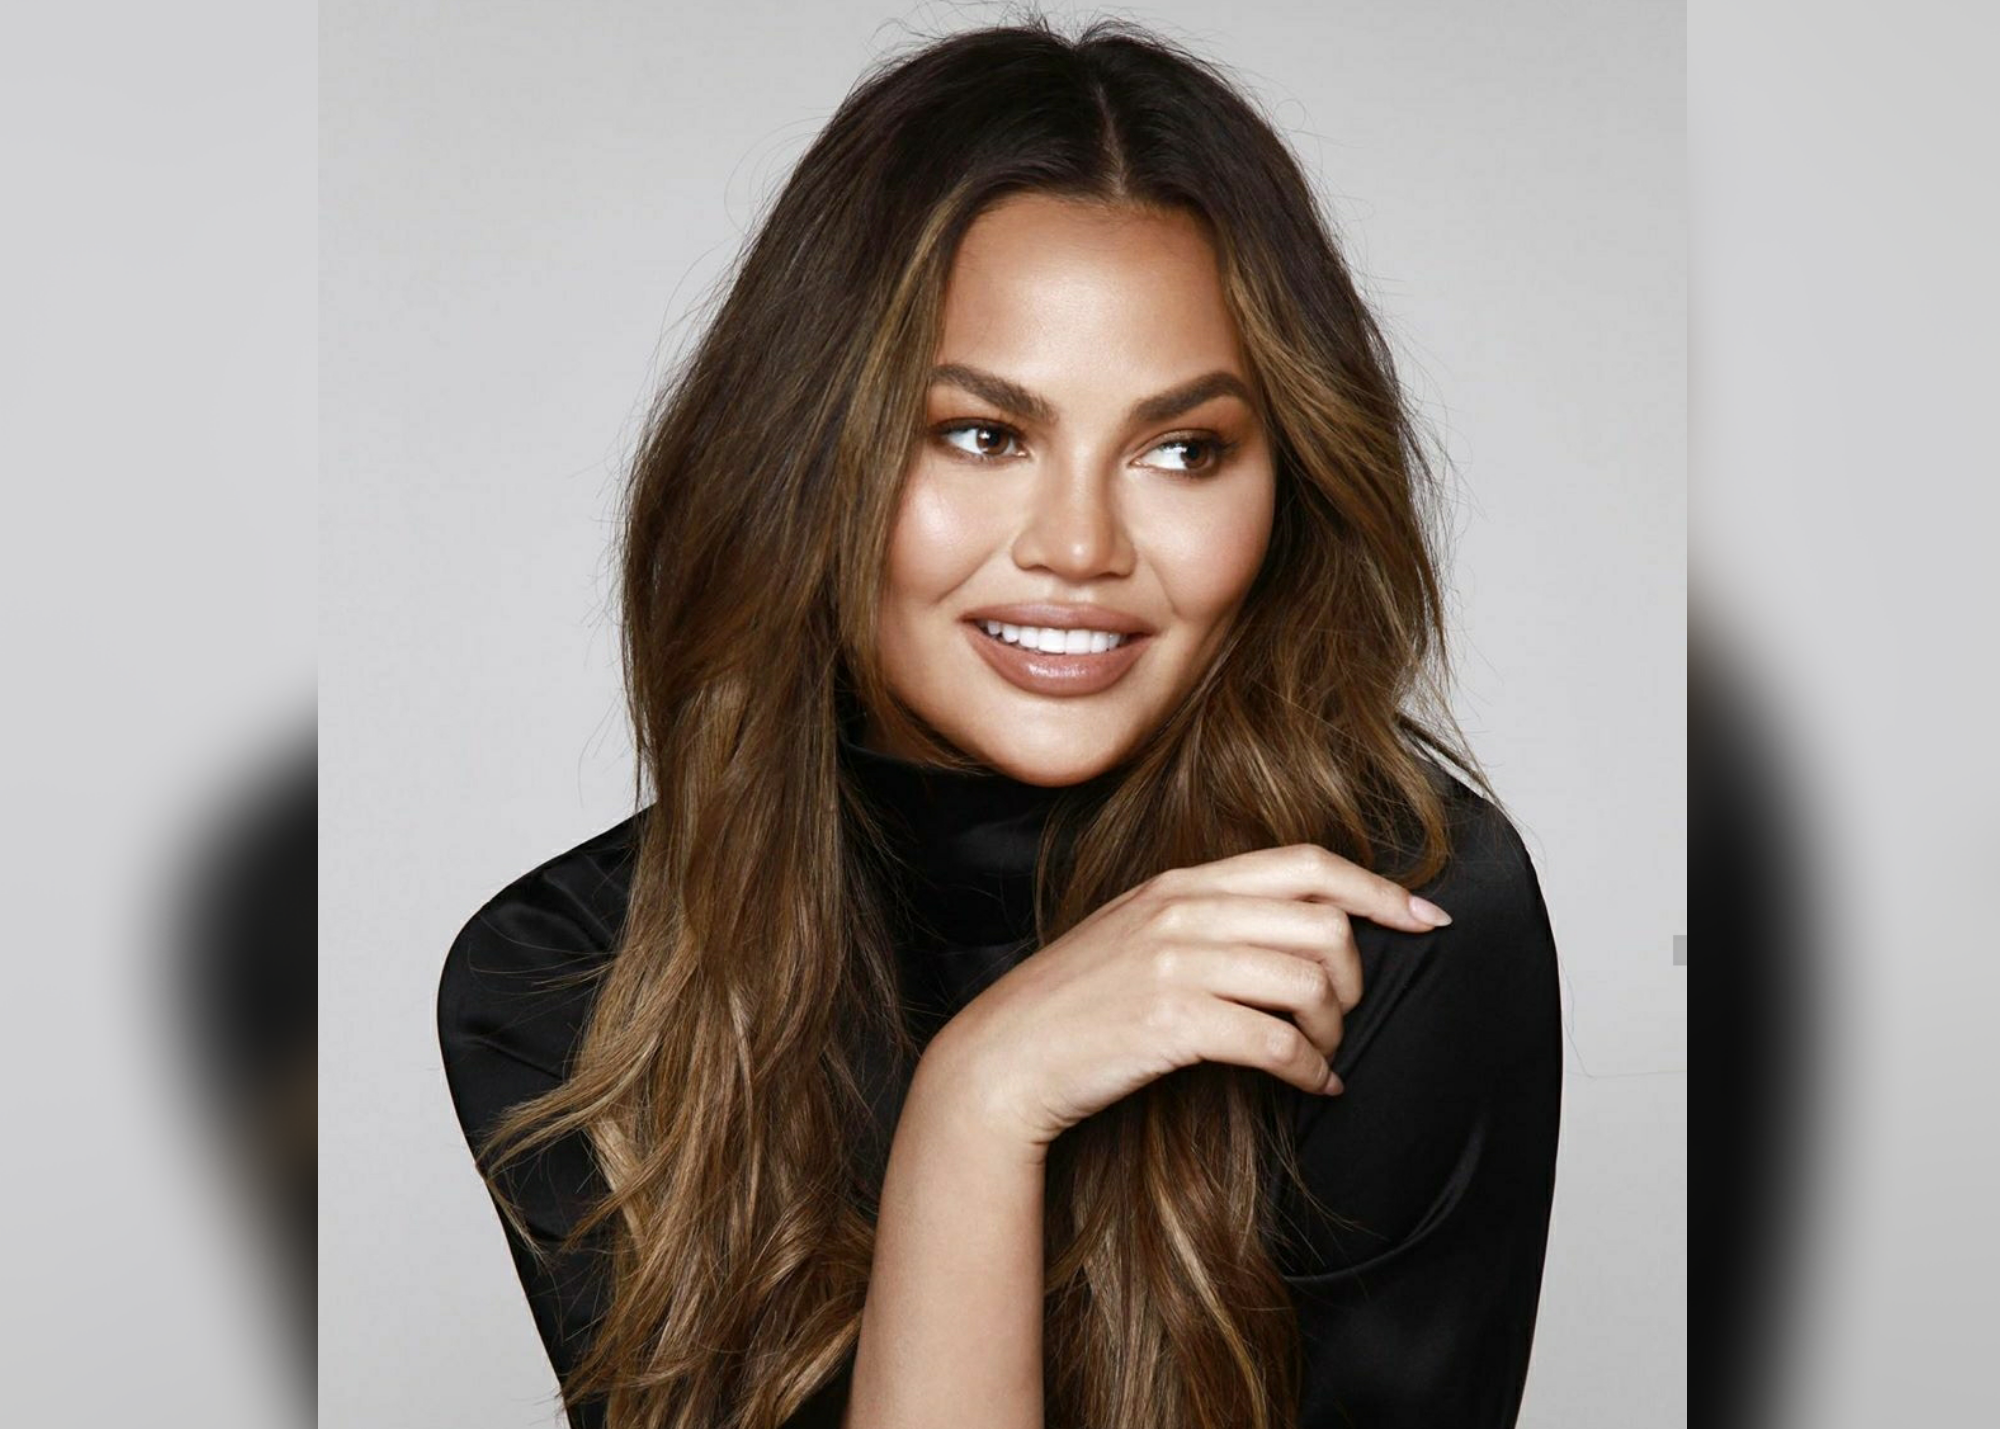 Chrissy Teigen Commits To Donating $200K In Bail Money After Trump’s “MAGA Night” Tweet